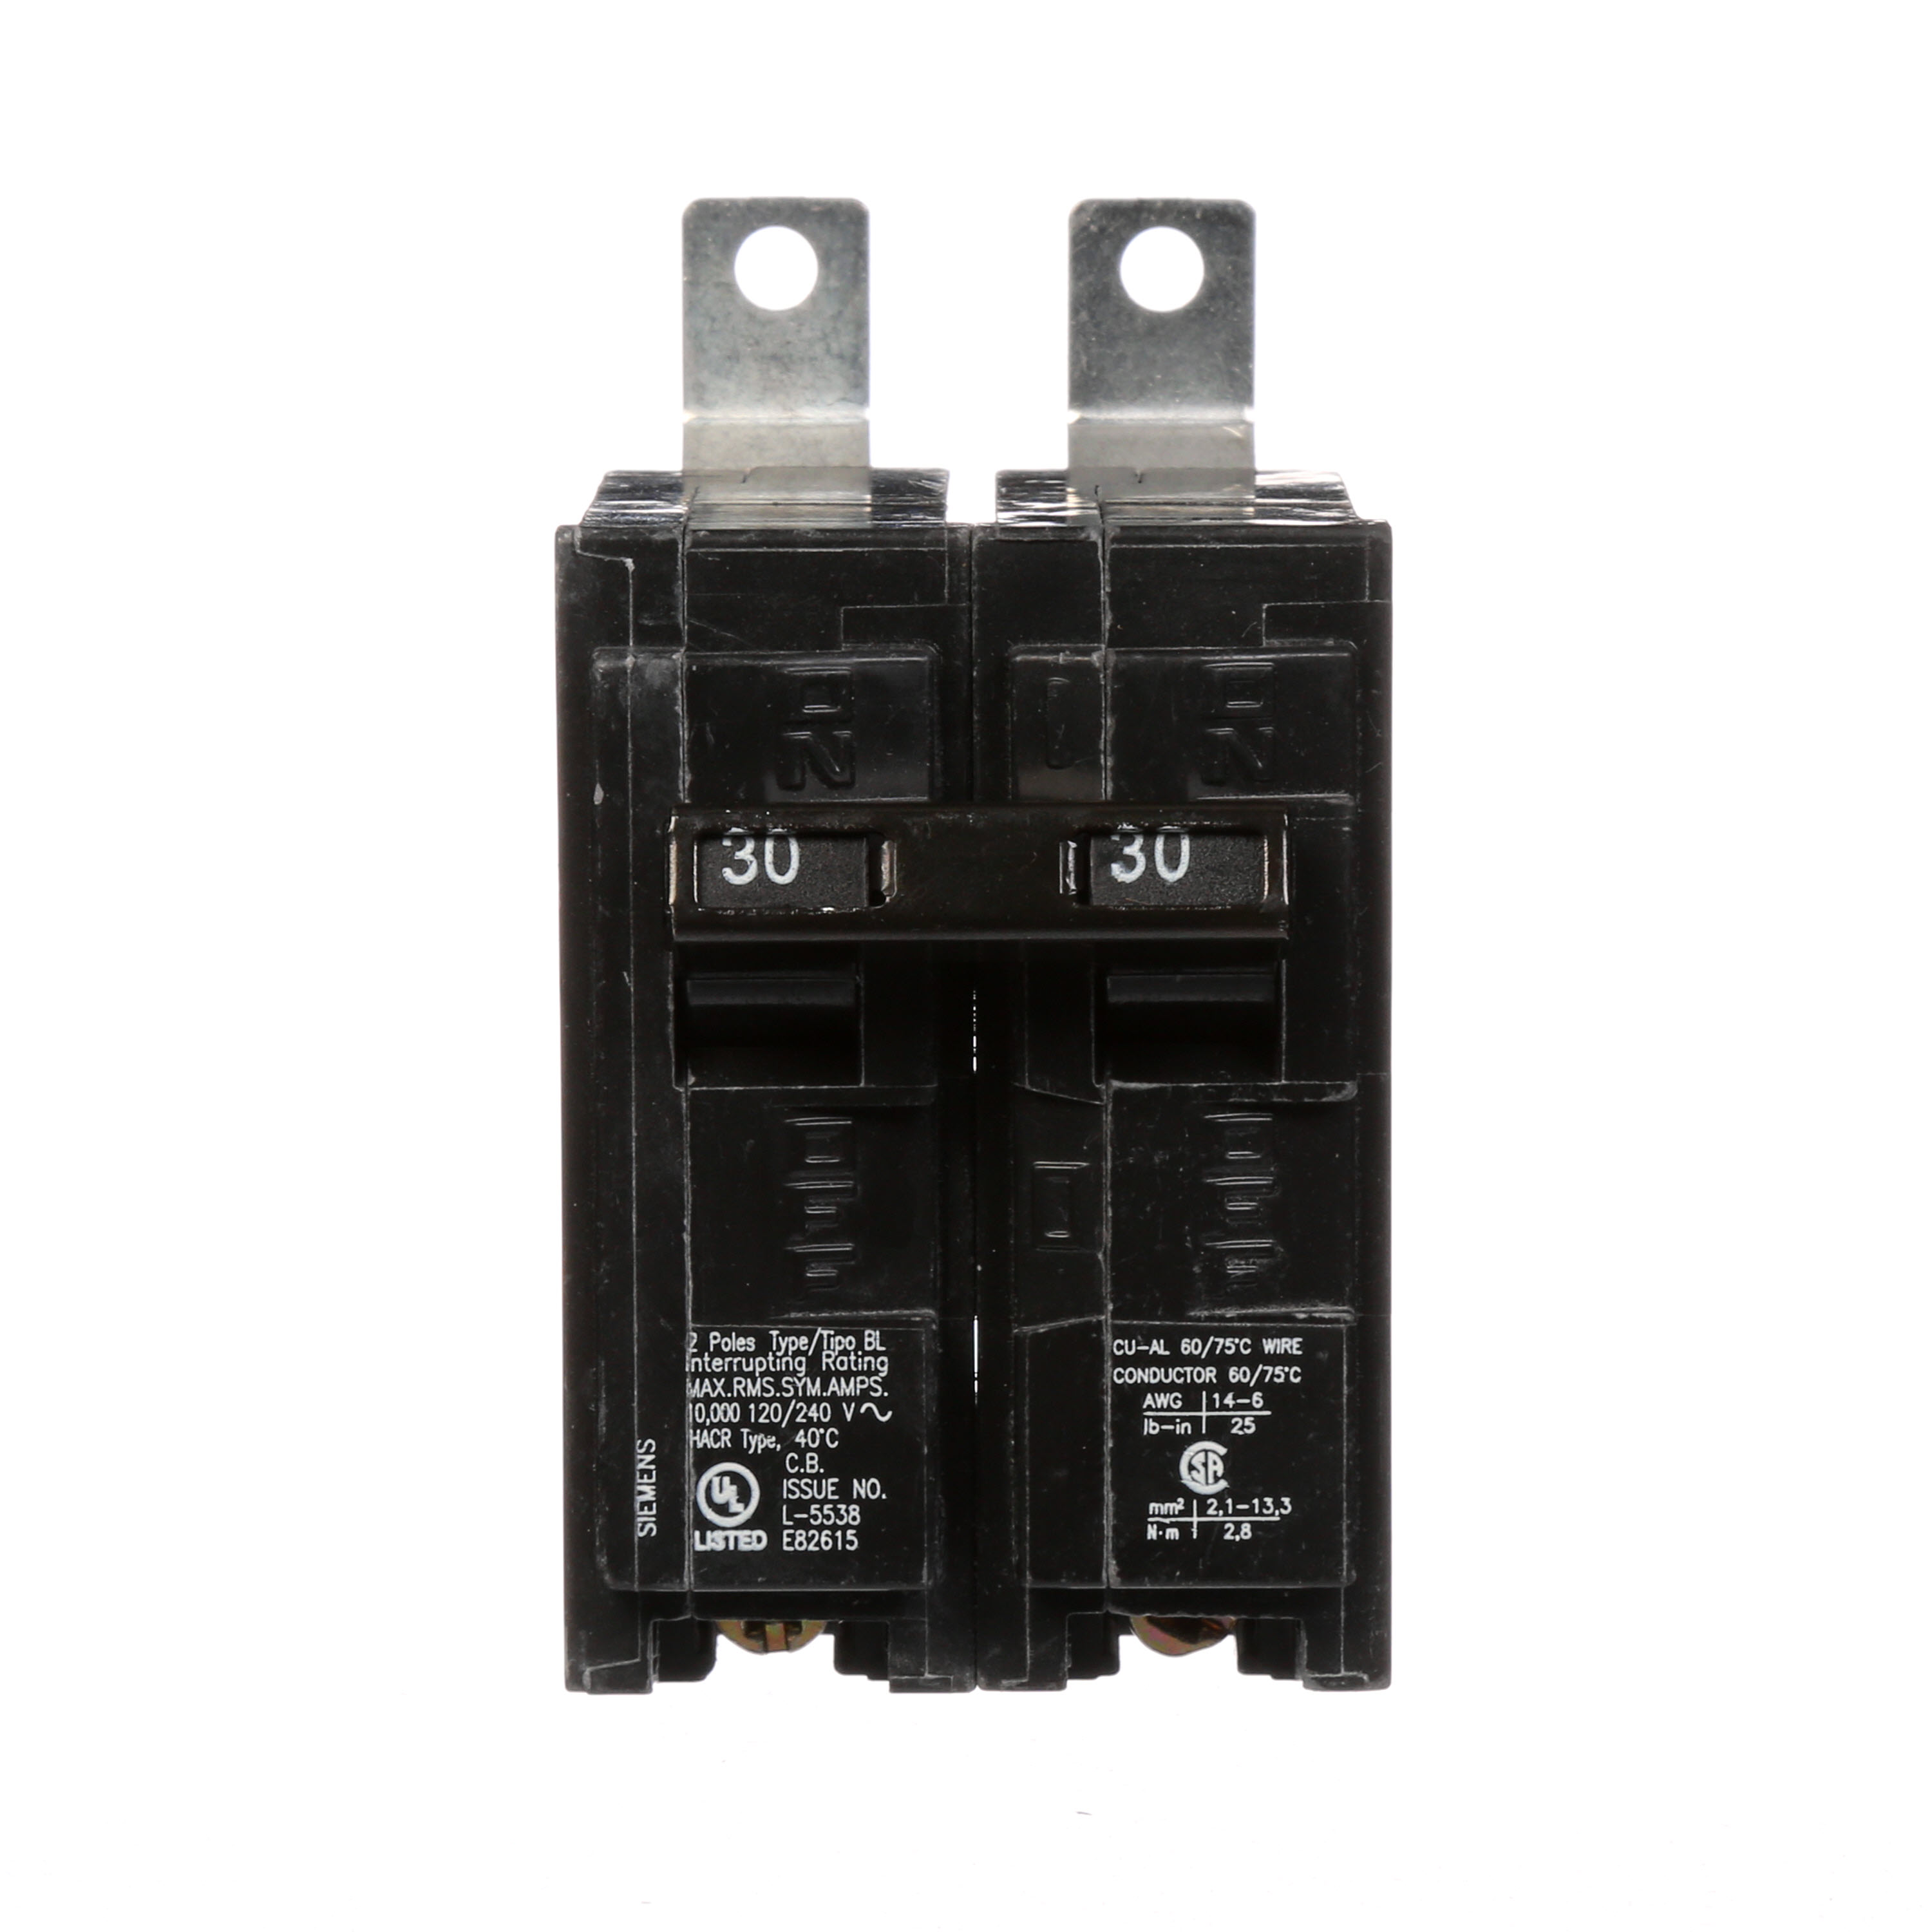 Siemens Low Voltage Molded Case Circuit Breakers Panelboard Mounting 240V Circuit Breakers - Type BL, 2-Pole, 120/240VAC are Circuit Protection Molded Case Circuit Breakers. Type BL Application Electrical Distribution Standard UL 489 Voltage Rating 120/240V Am perage Rating 30A Trip Range Thermal Magnetic Interrupt Rating 10 AIC Number Of Poles 2P